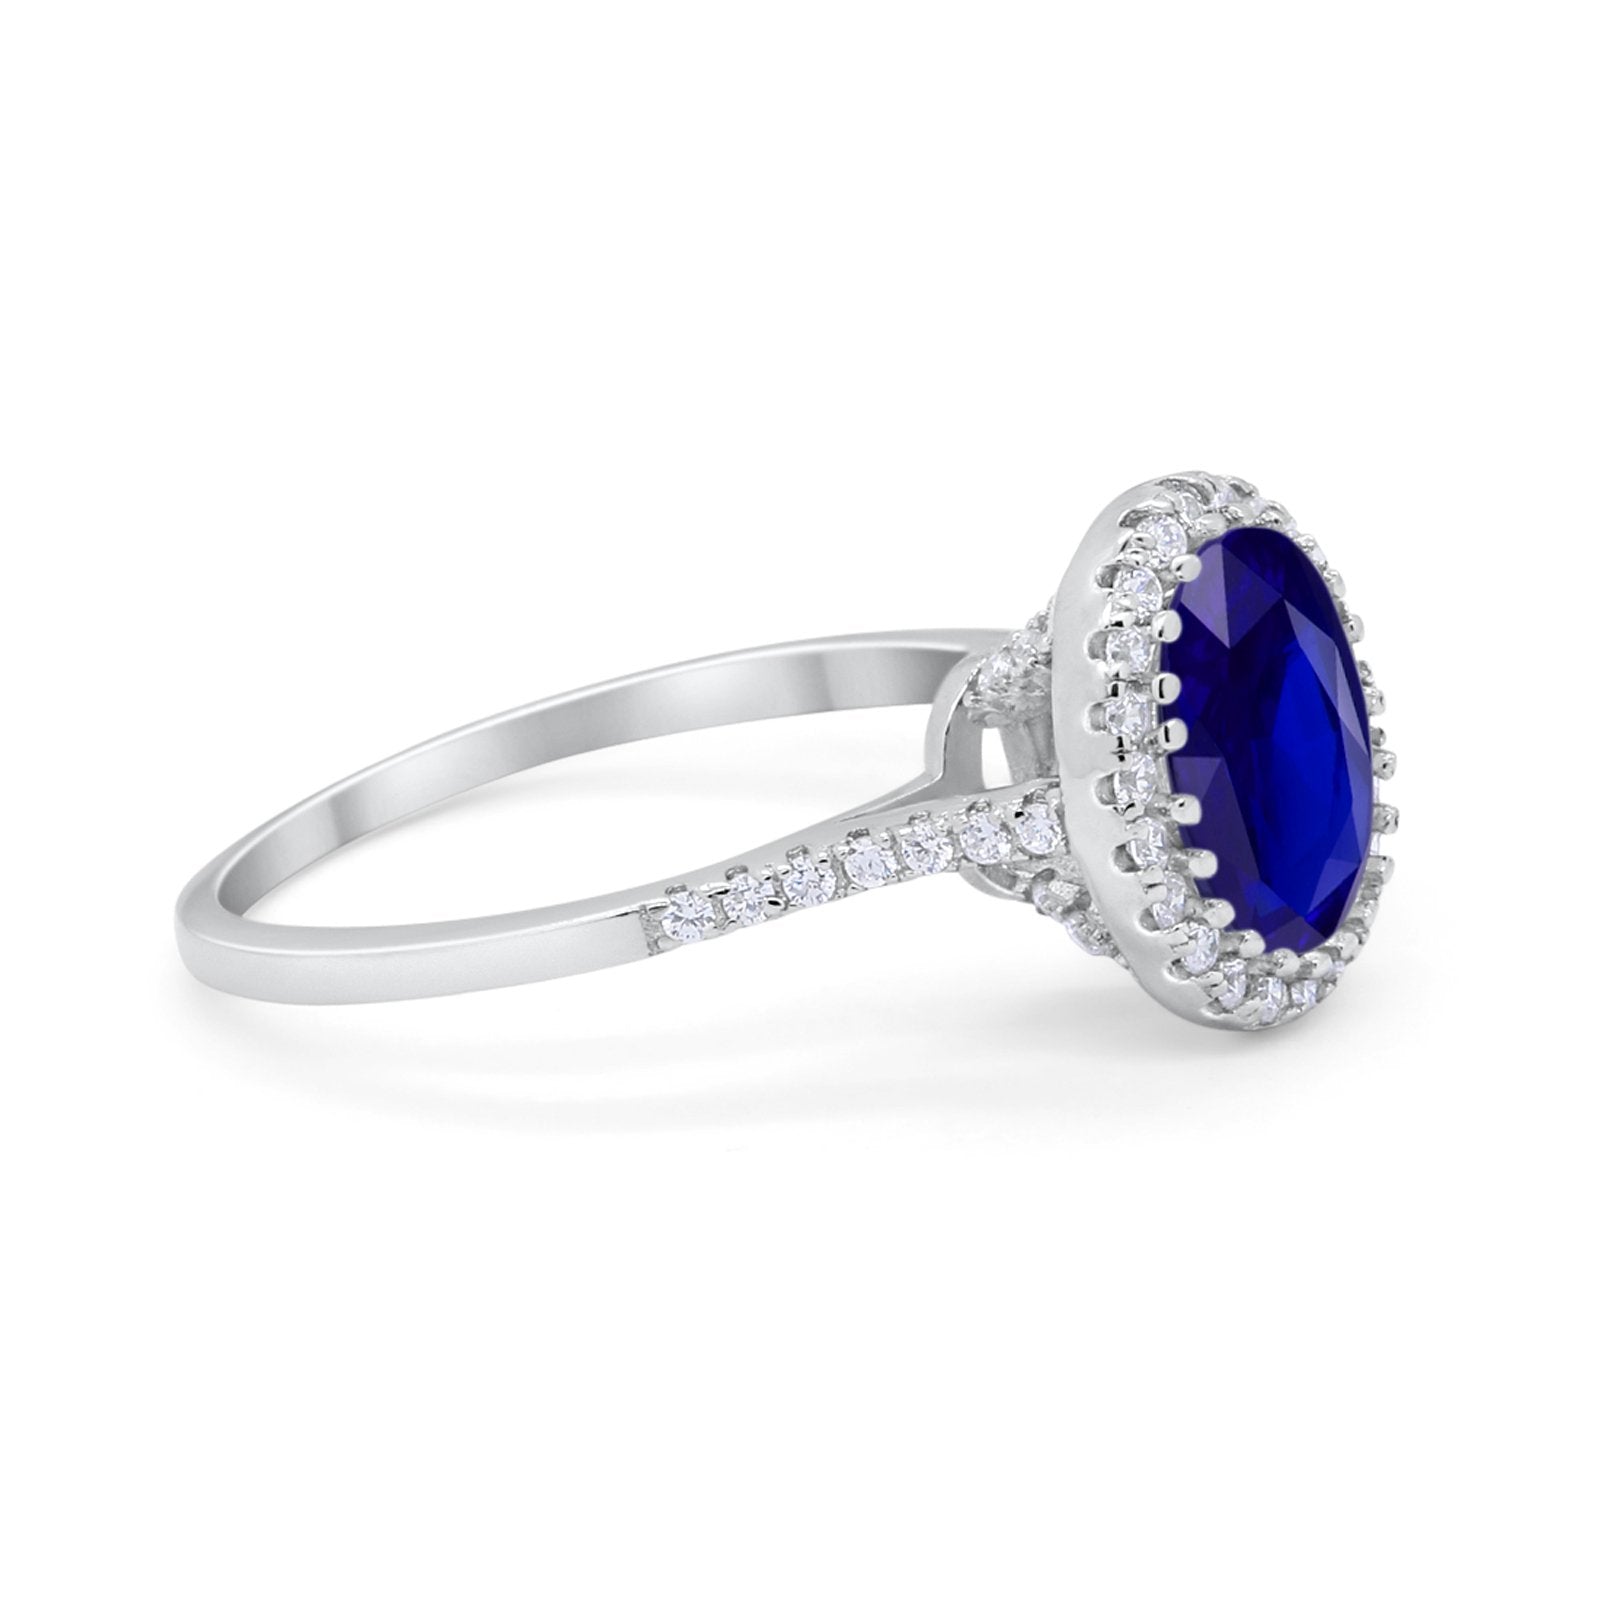 Art Deco Oval Wedding Bridal Ring Simulated Blue Sapphire CZ 925 Sterling Silver